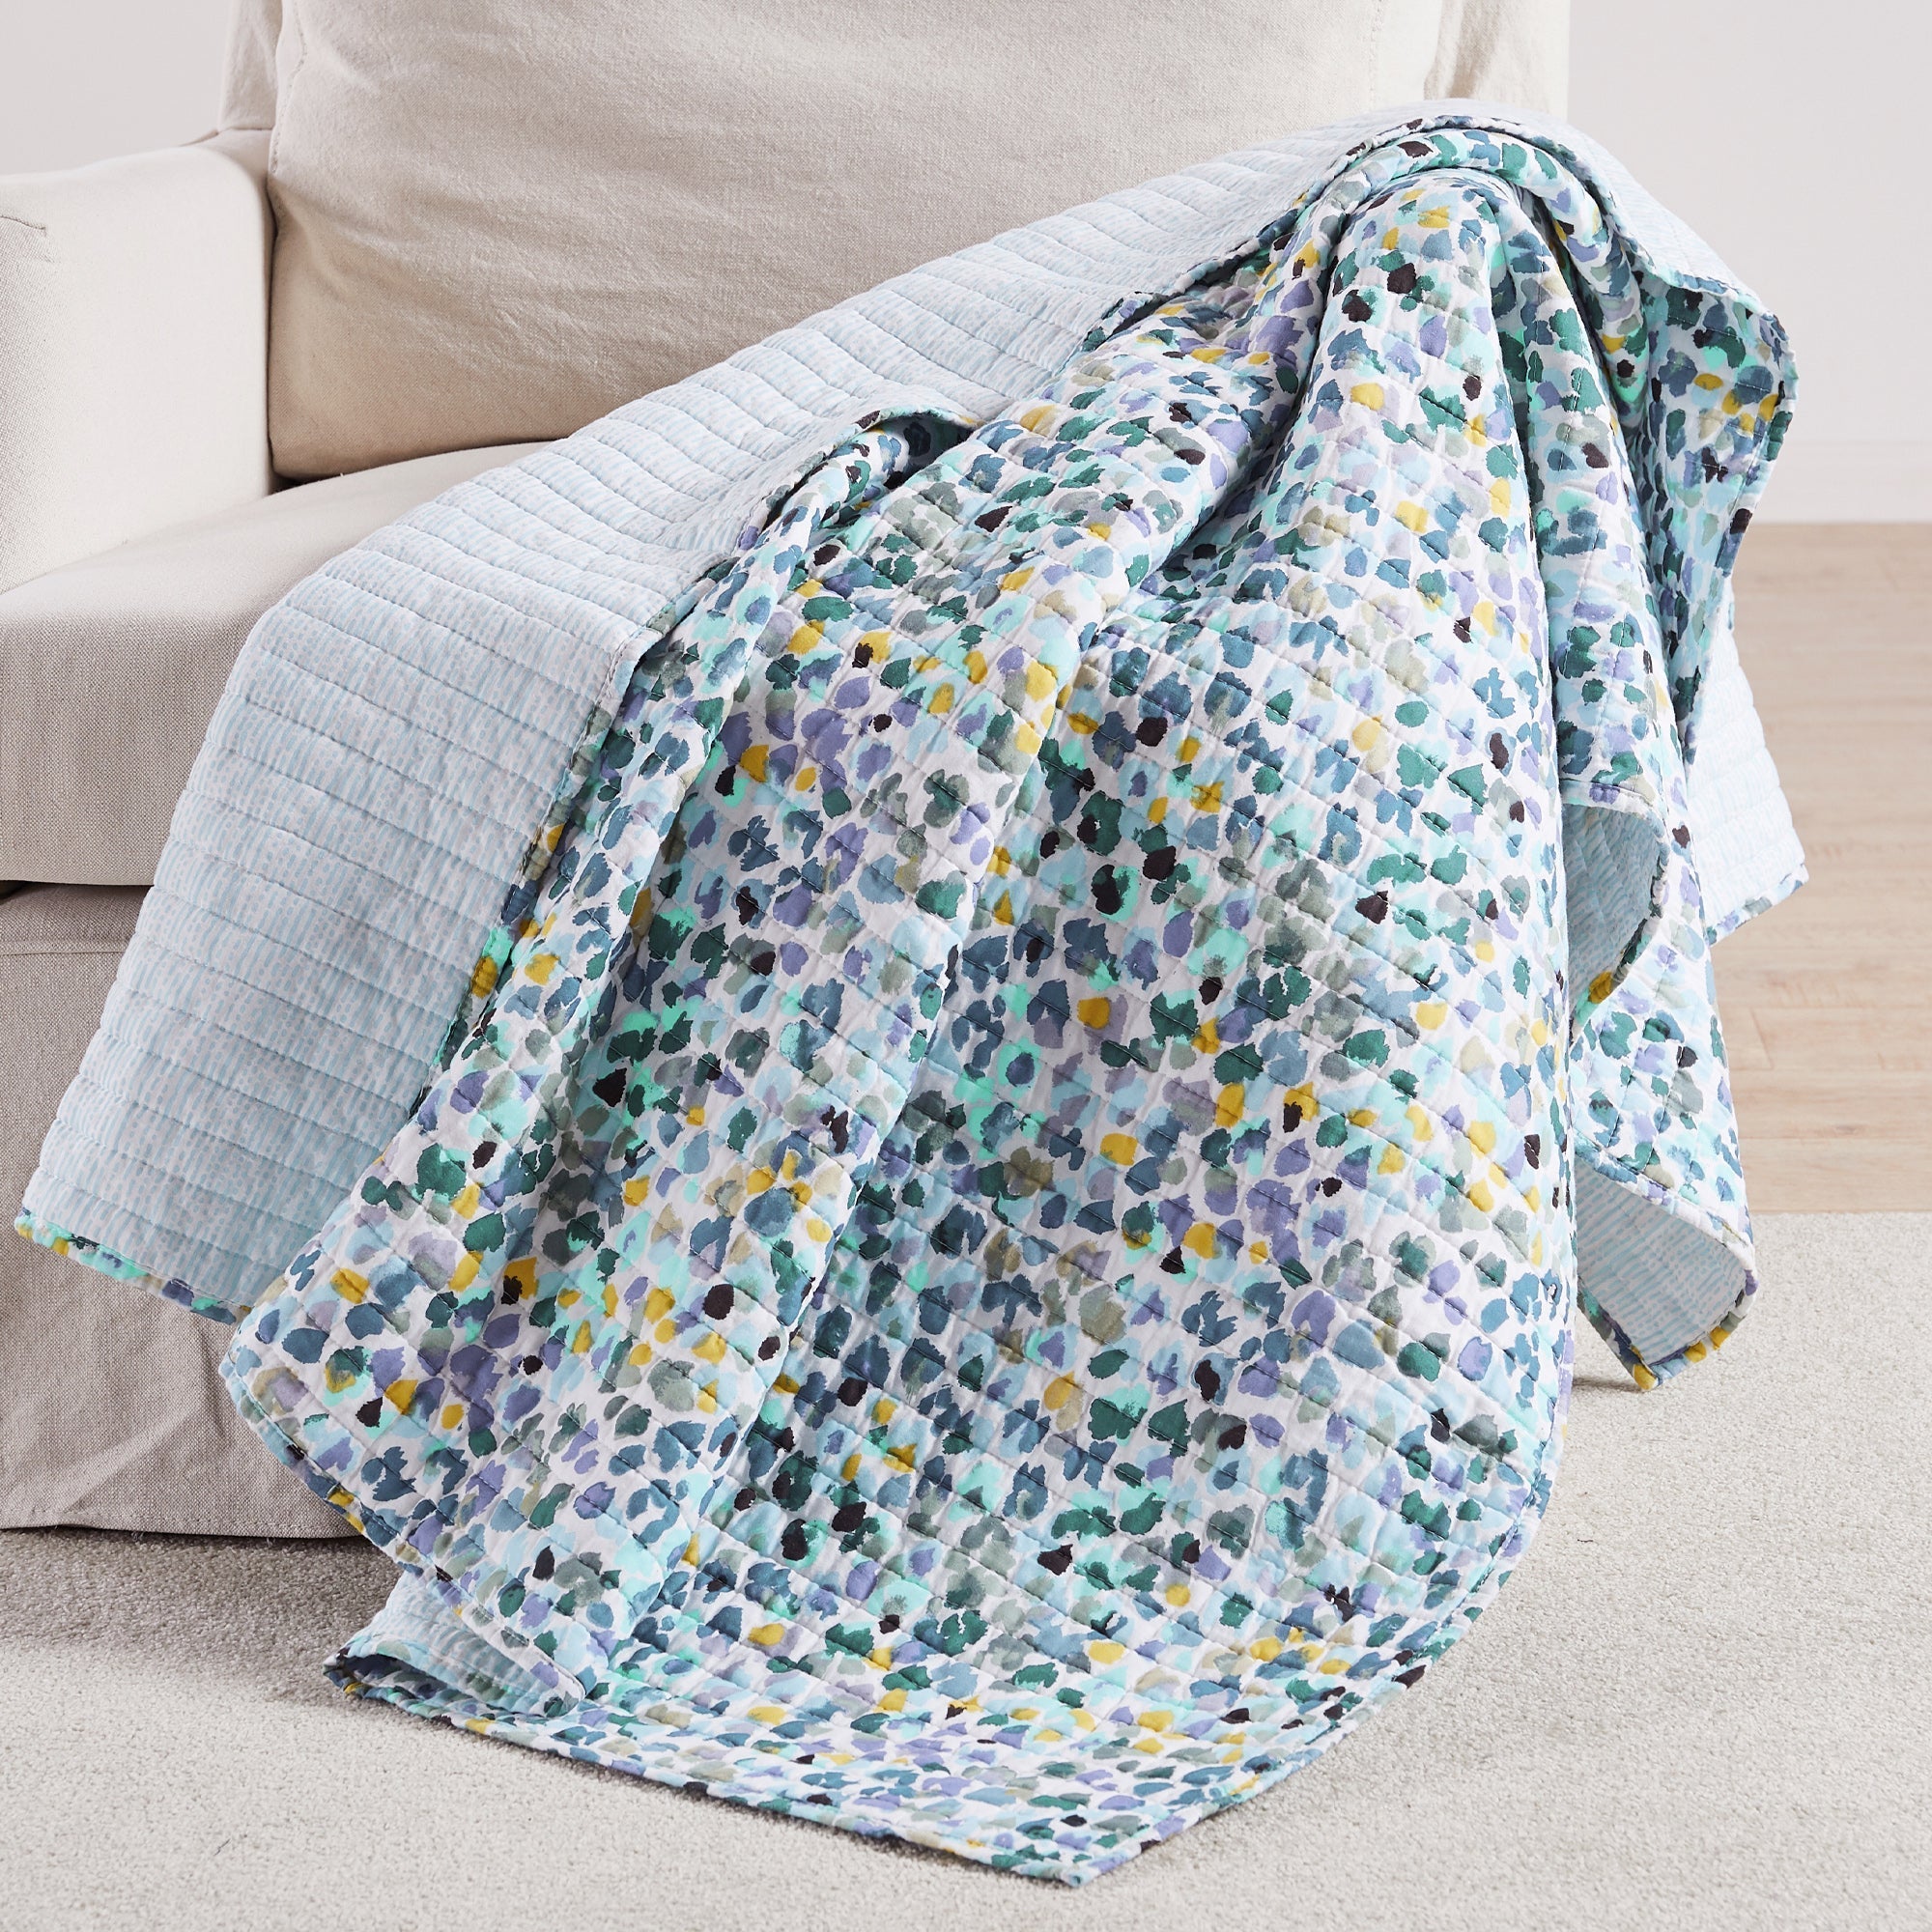 Calico Blue Quilted Throw